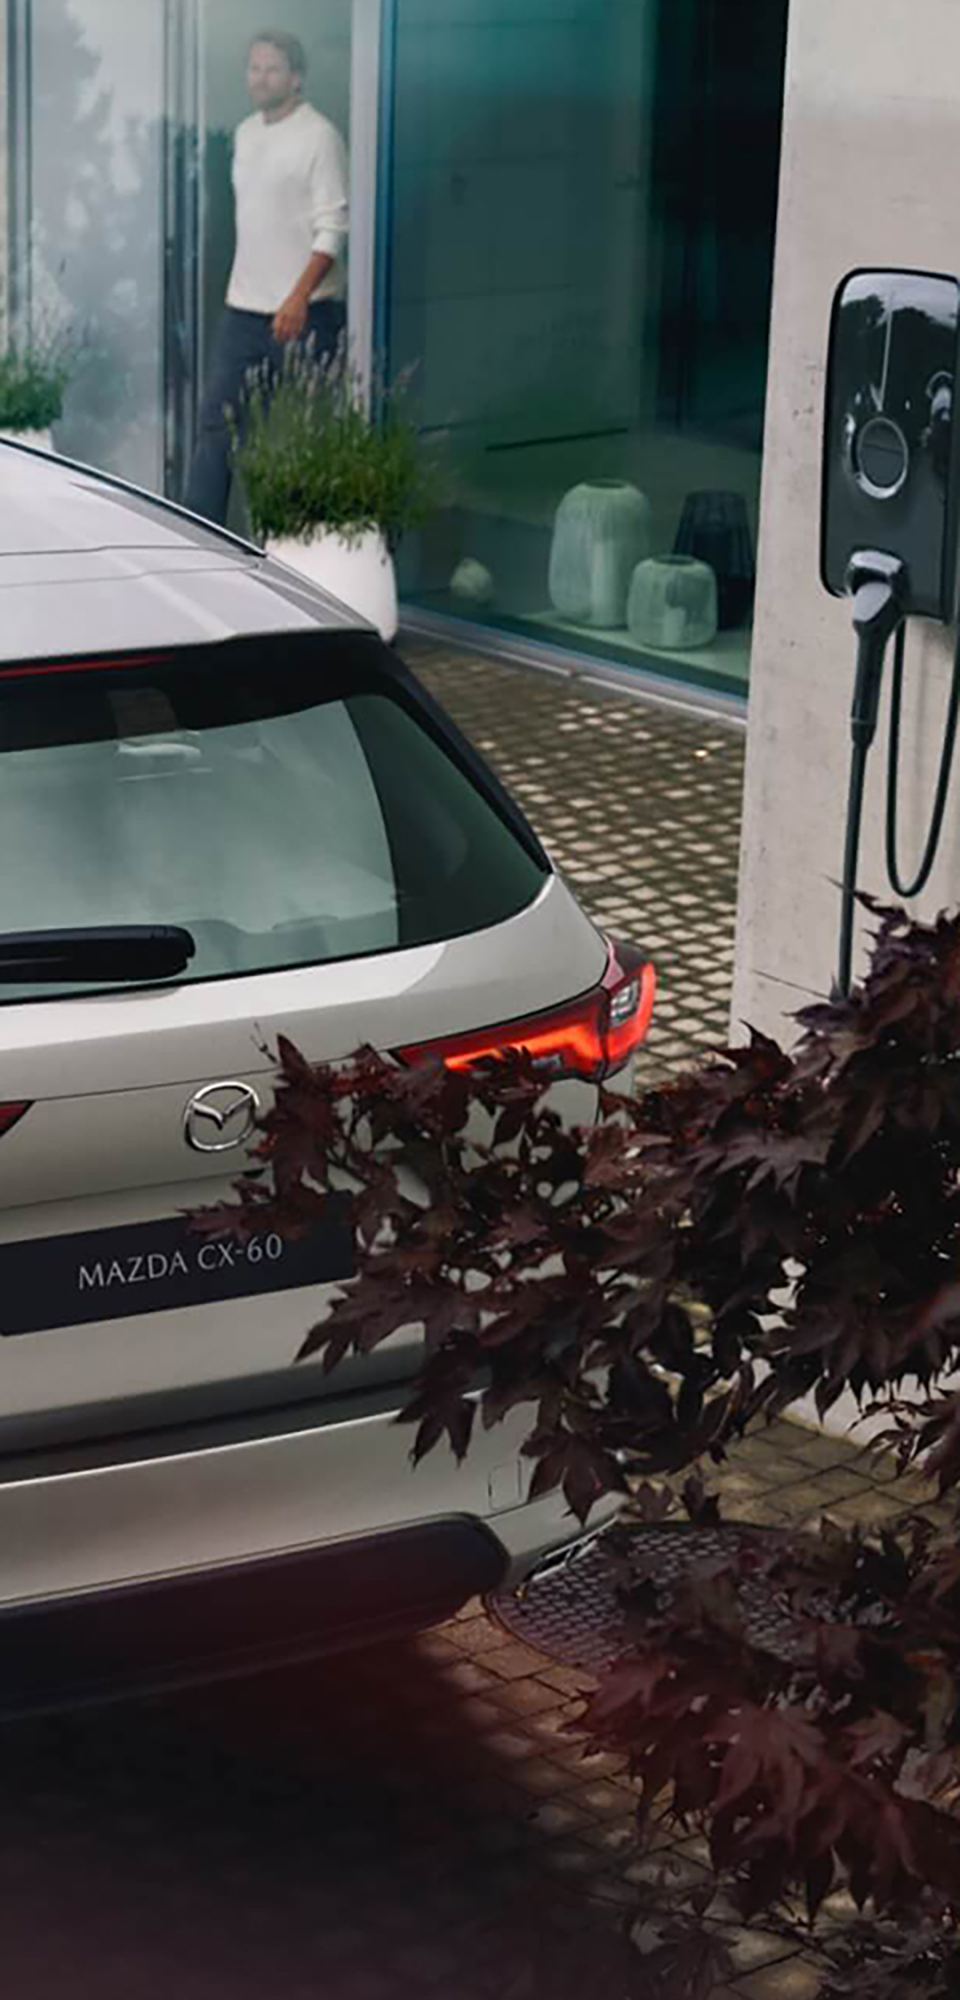 The all-new Mazda CX-60 Plug-In Hybrid SUV parked next to a wallbox for home charging.